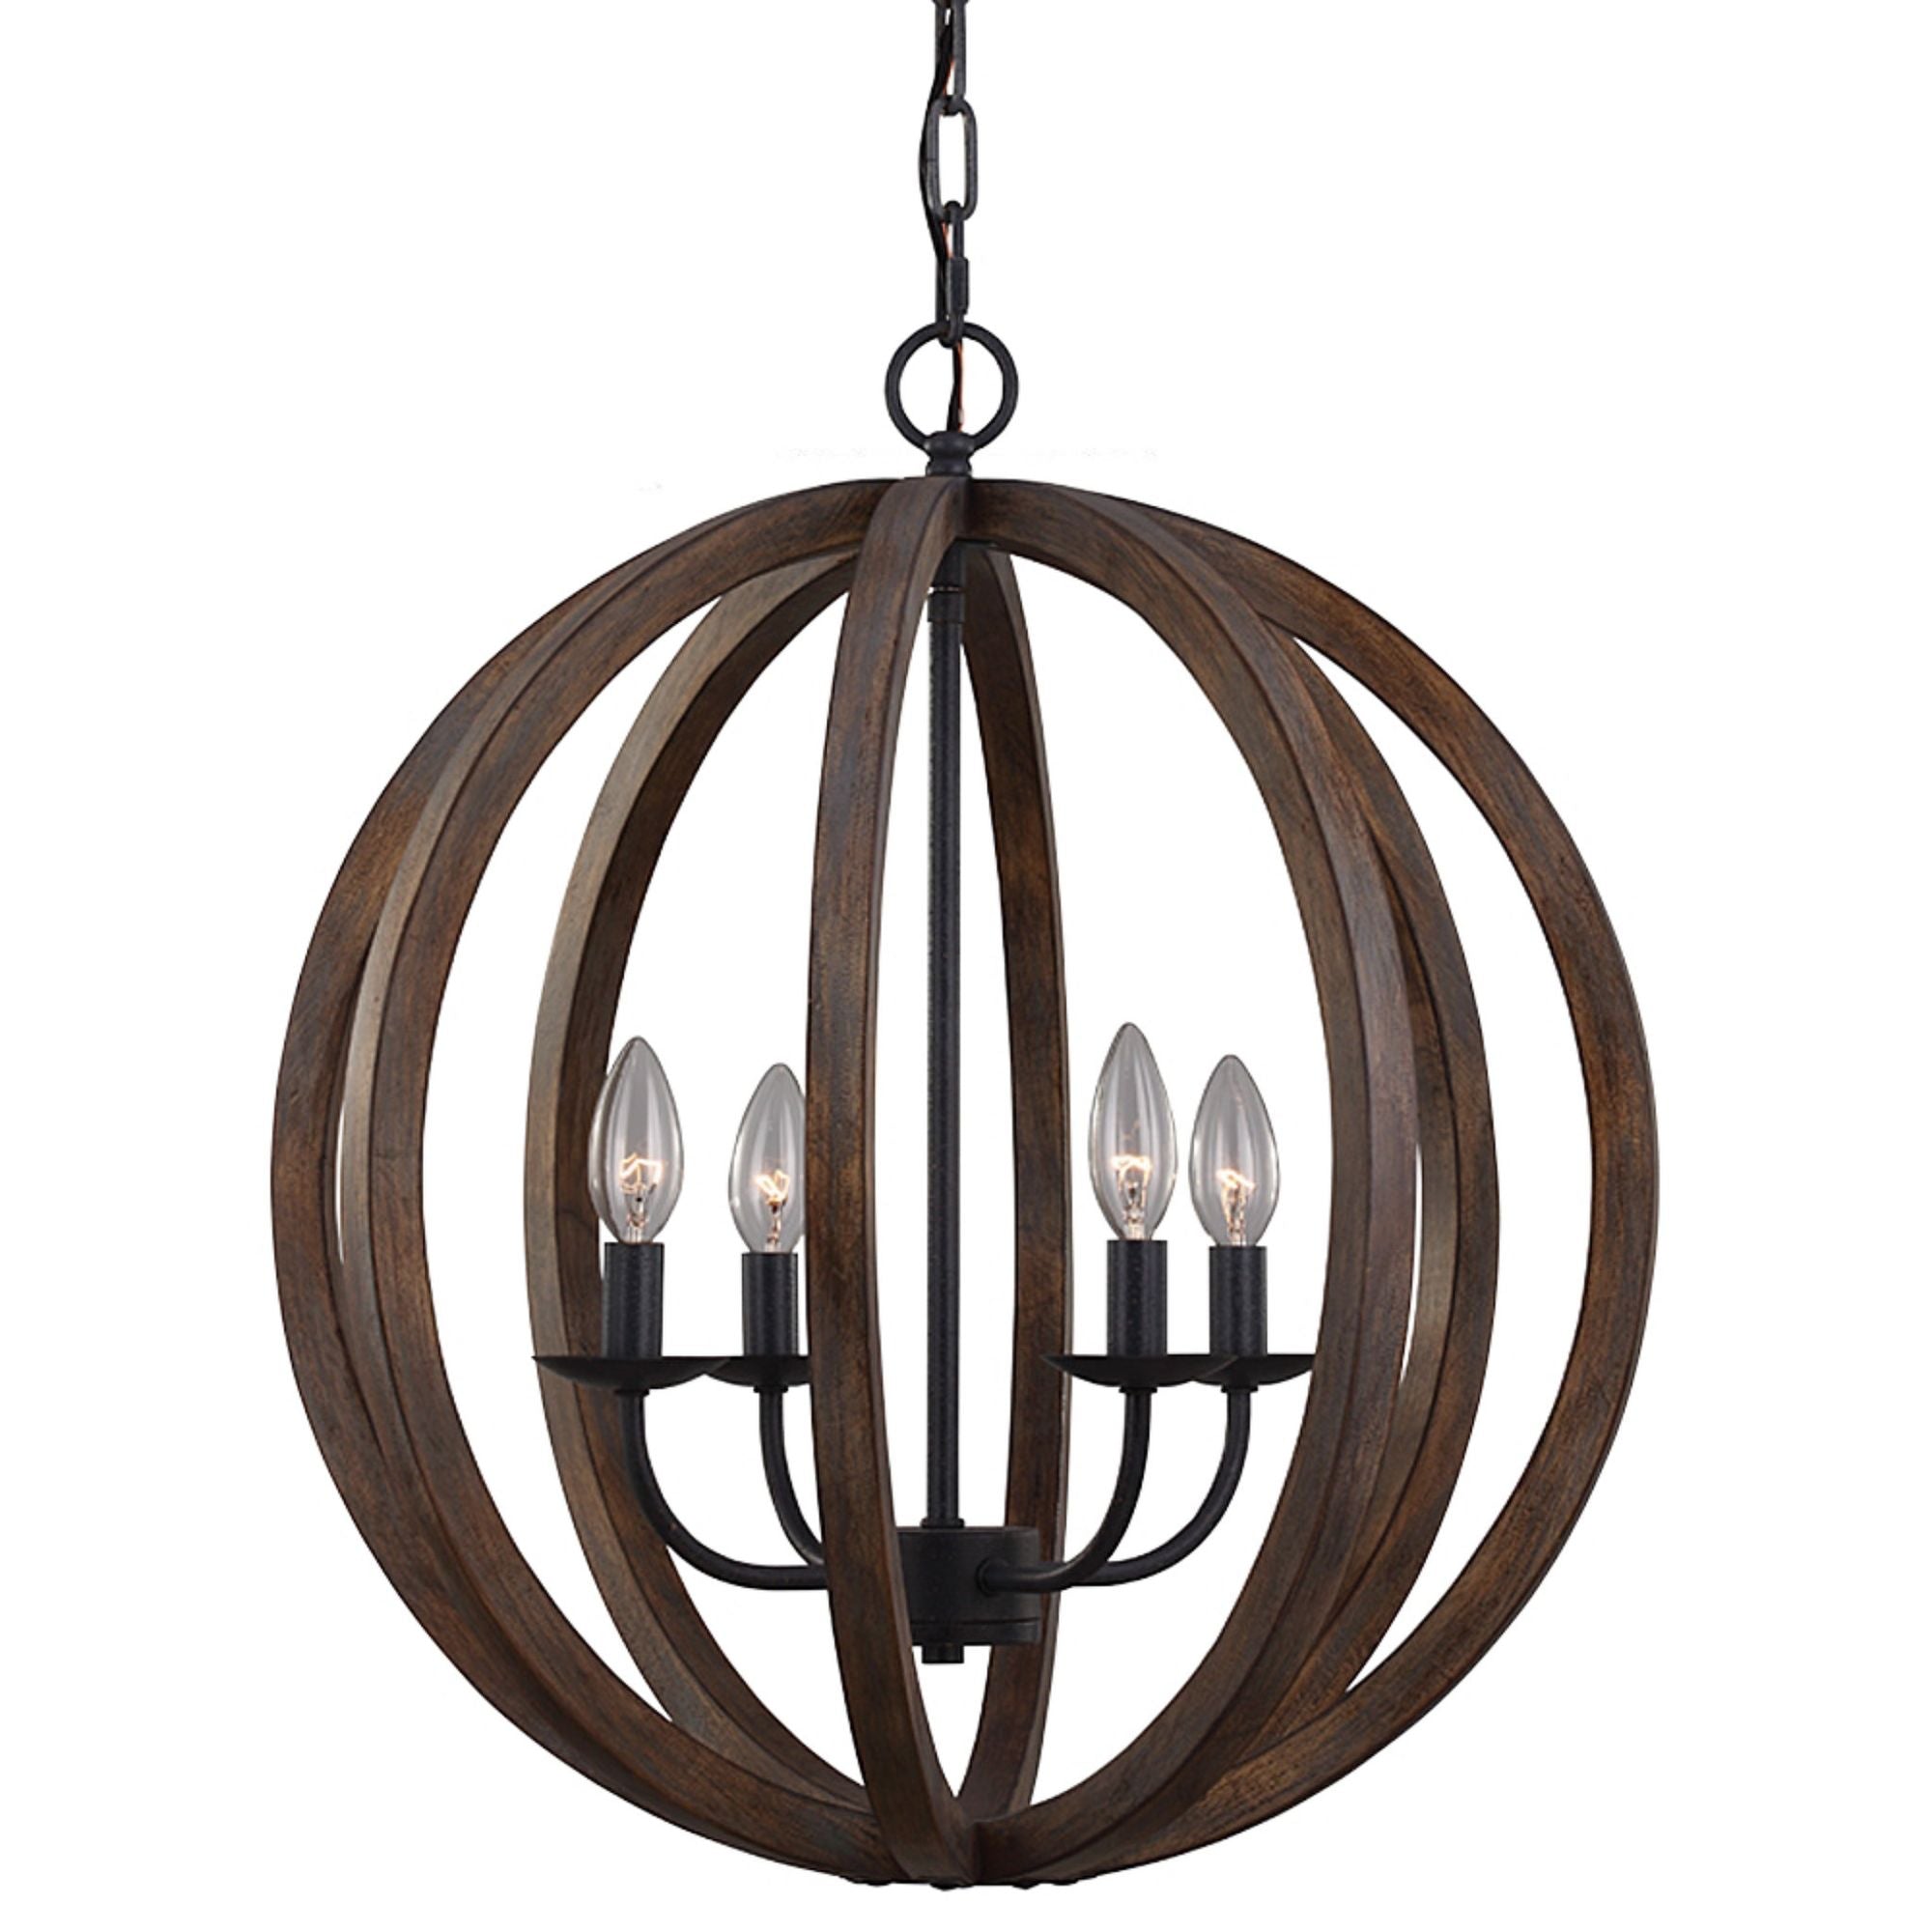 Sean Lavin Allier Small Pendant in Weathered Oak Wood / Antique Forged Iron